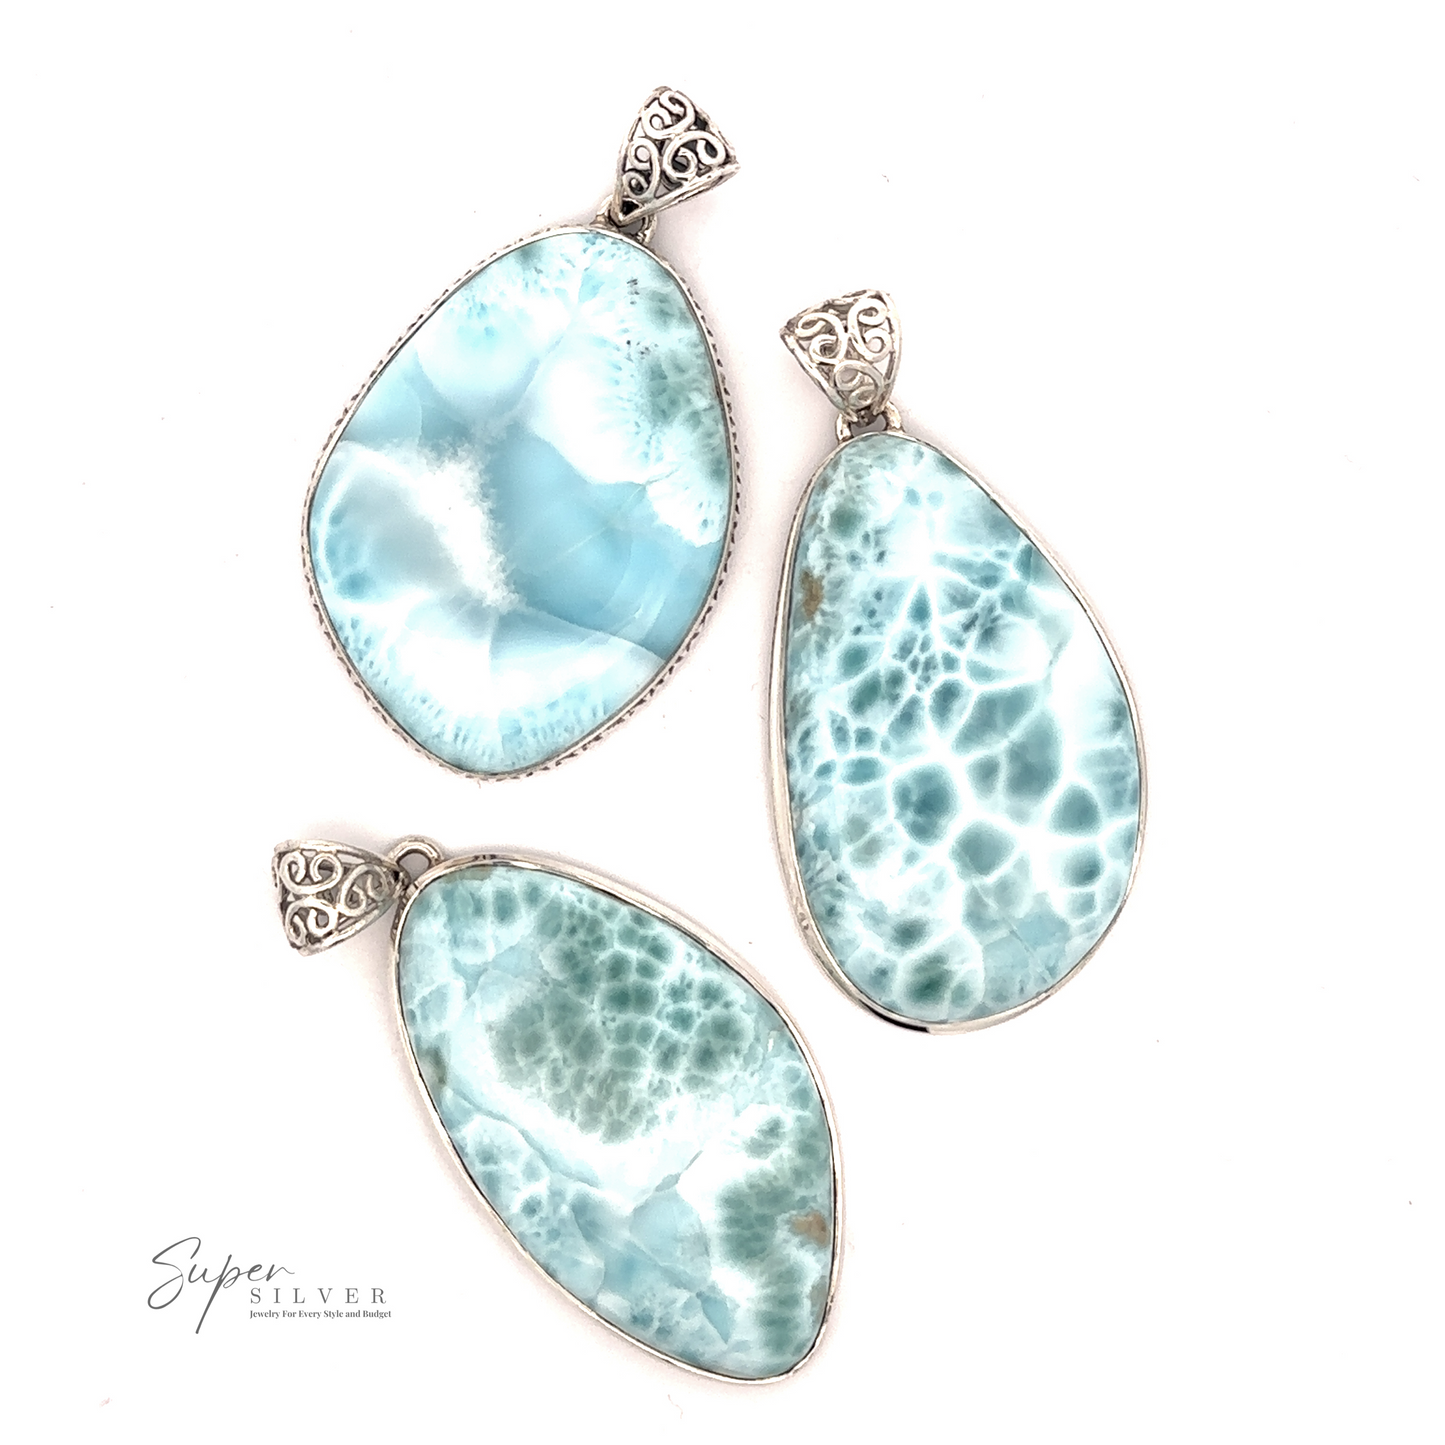 
                  
                    Three teardrop-shaped Freeform Large Larimar Pendants with intricate sterling silver bail designs are displayed on a white background. The left pendant has a smooth blue pattern, while the other two feature light blue and white patterns.
                  
                